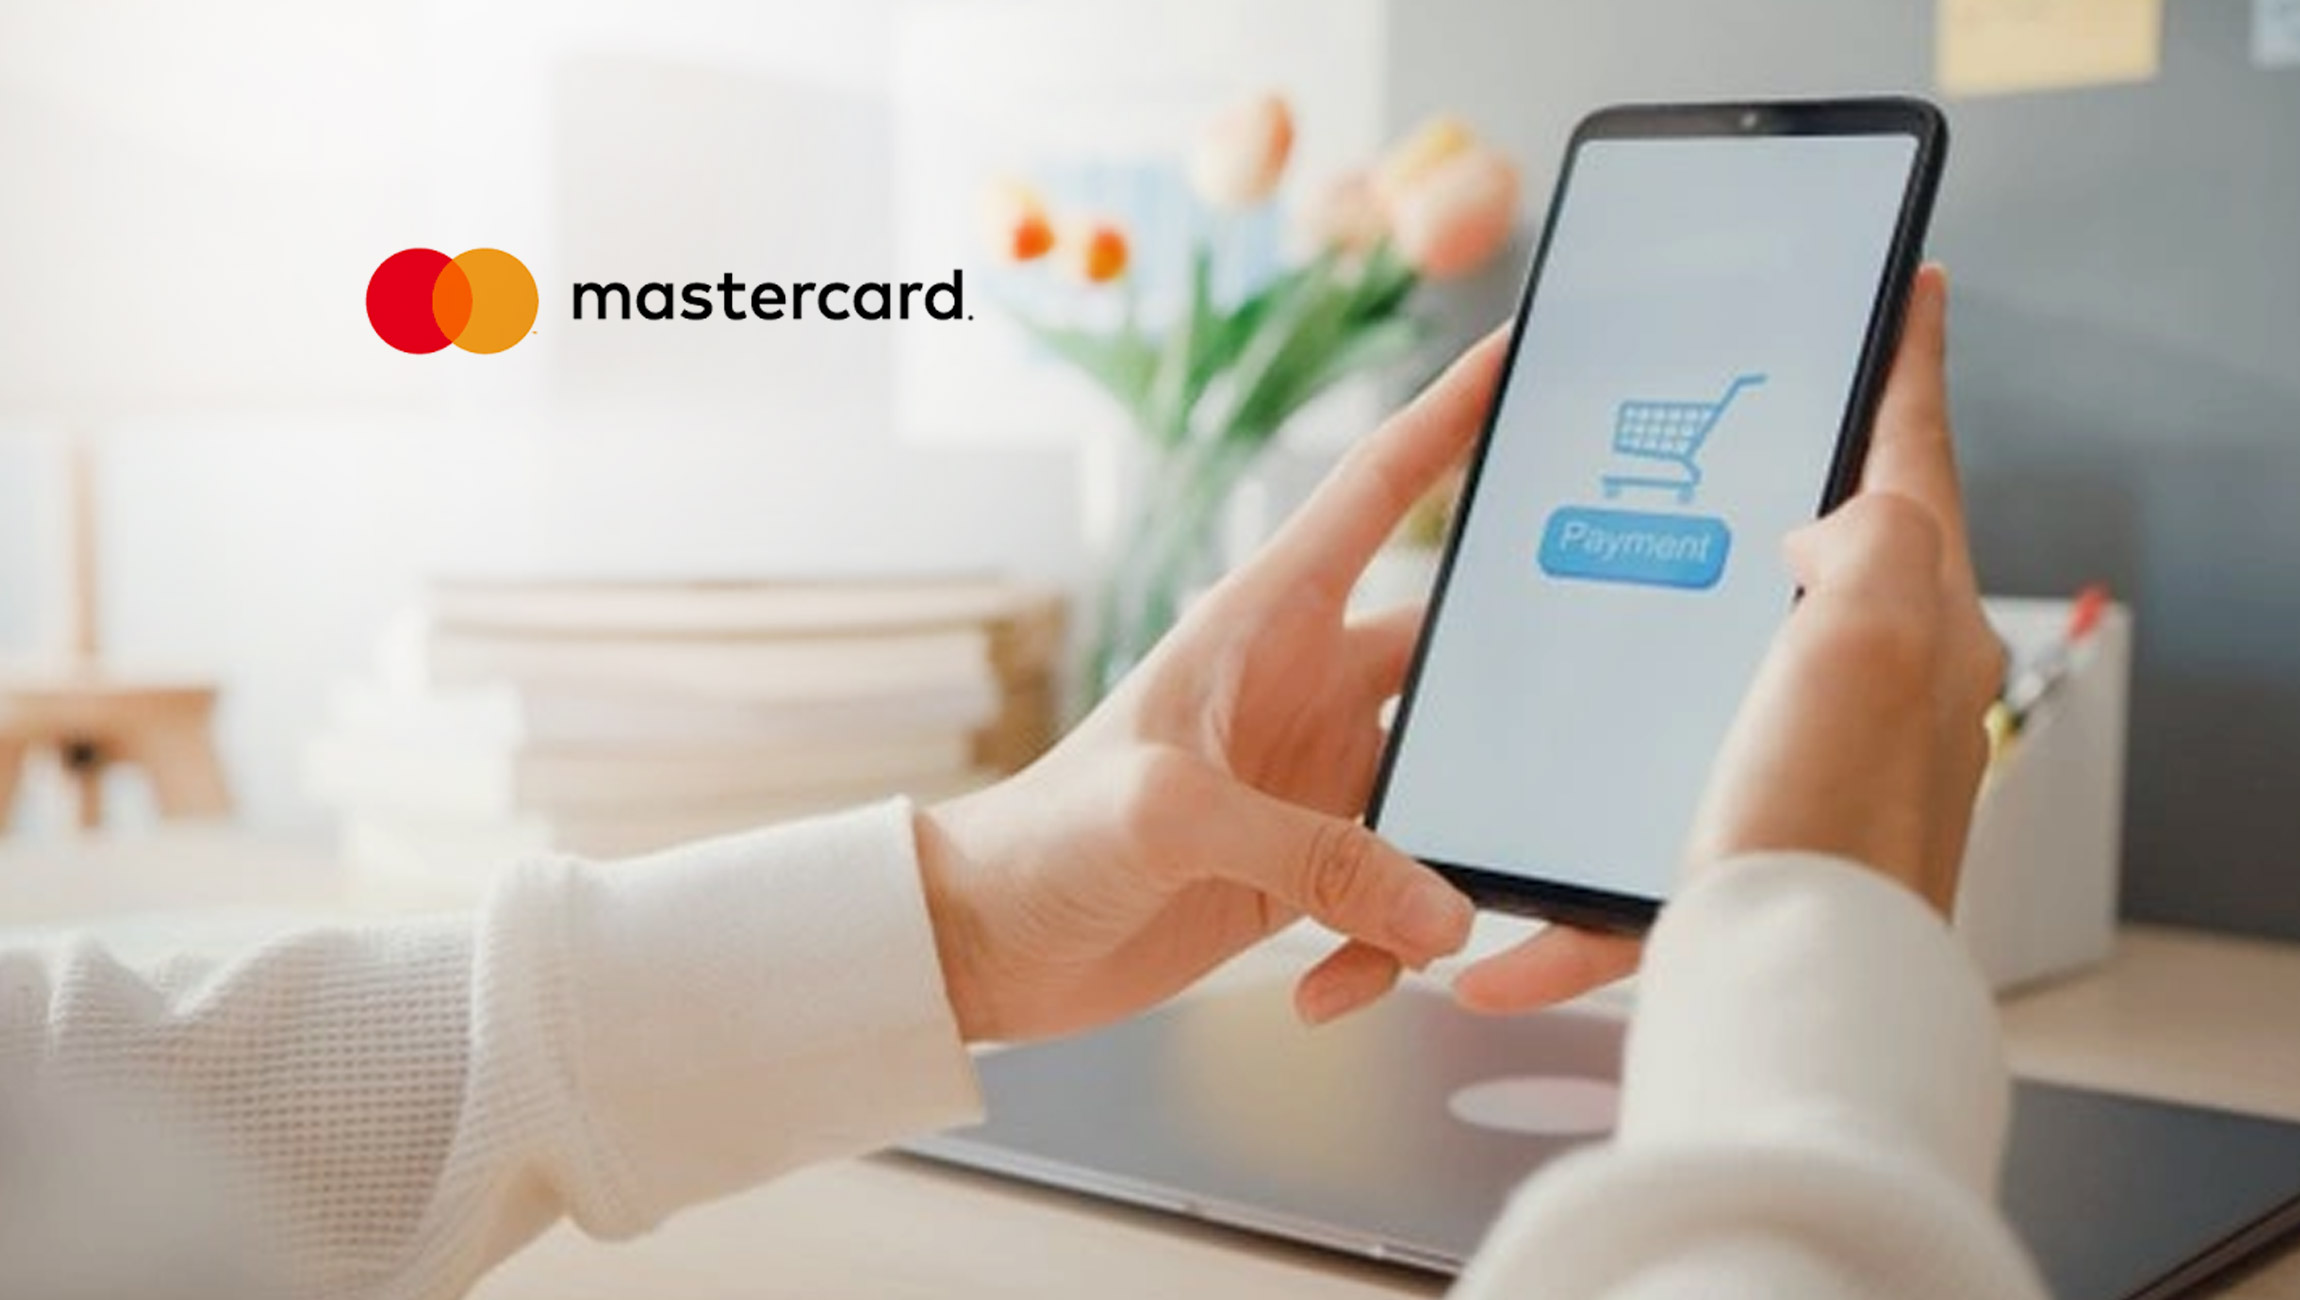 Mastercard launches next-generation identity technology with Microsoft to help more consumers shop online safely